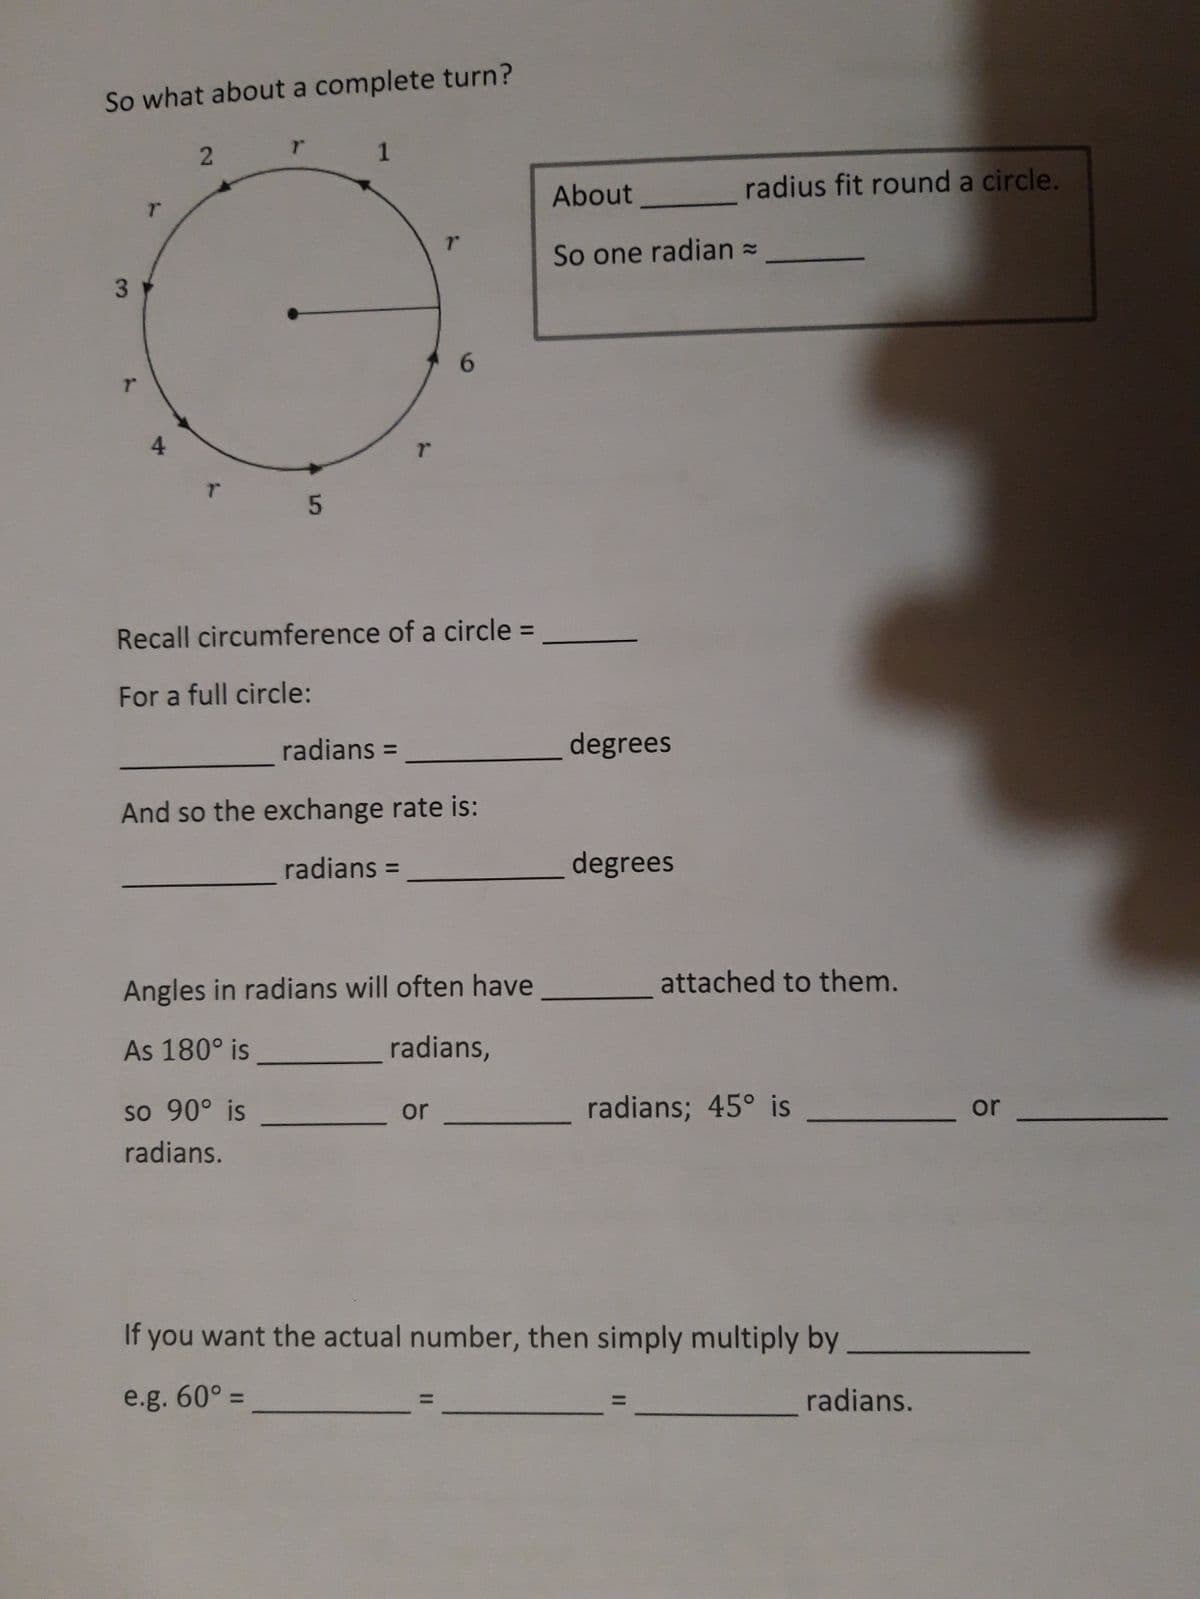 So what about a complete turn?
3
2
1
1
Recall circumference of a circle=
For a full circle:
radians =
And so the exchange rate is:
radians =
or
=
Angles in radians will often have
As 180° is
radians,
so 90° is
radians.
About
So one radian =
degrees
radius fit round a circle.
degrees
attached to them.
radians; 45° is
If you want the actual number, then simply multiply by
e.g. 60° =
radians.
or